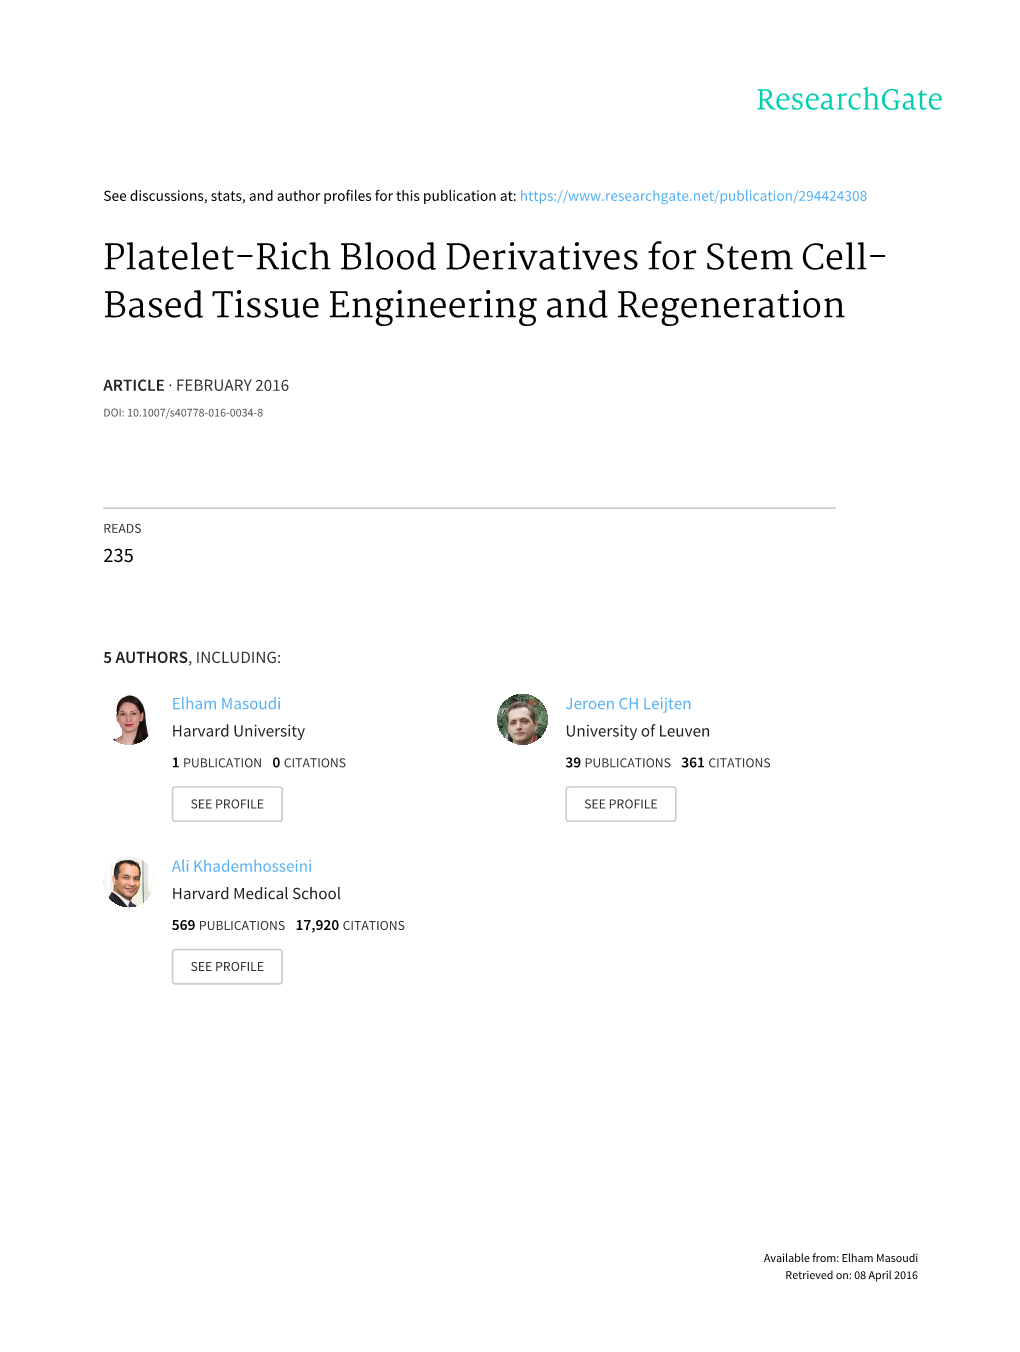 Platelet-Rich Blood Derivatives for Stem Cell- Based Tissue Engineering and Regeneration